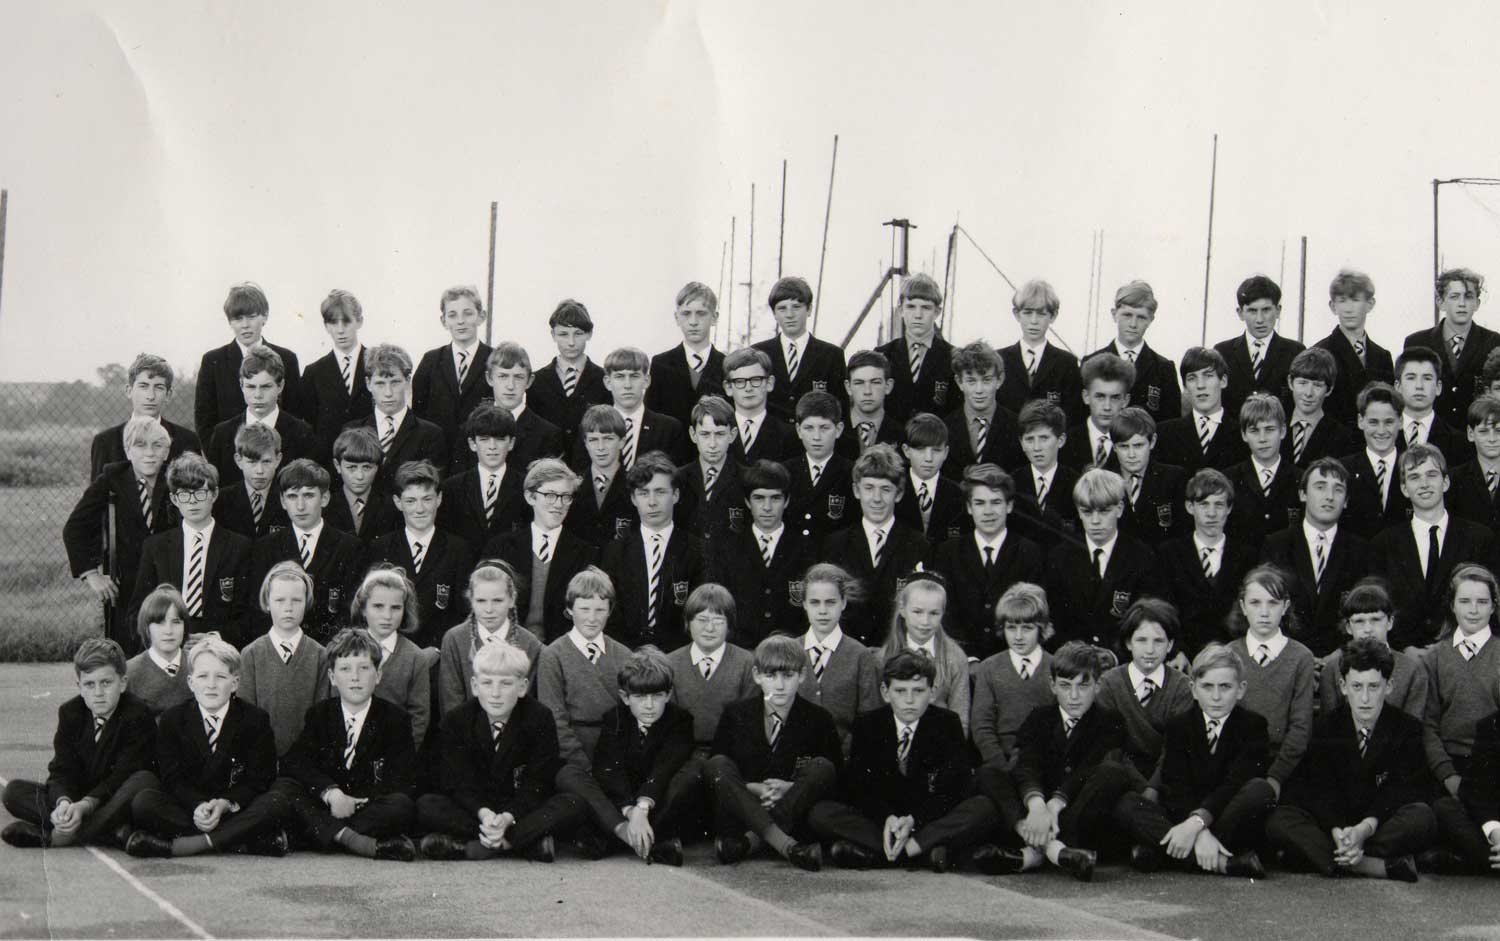 A photo of section1 of the Bells Grammar School photo from 1966 - section 1